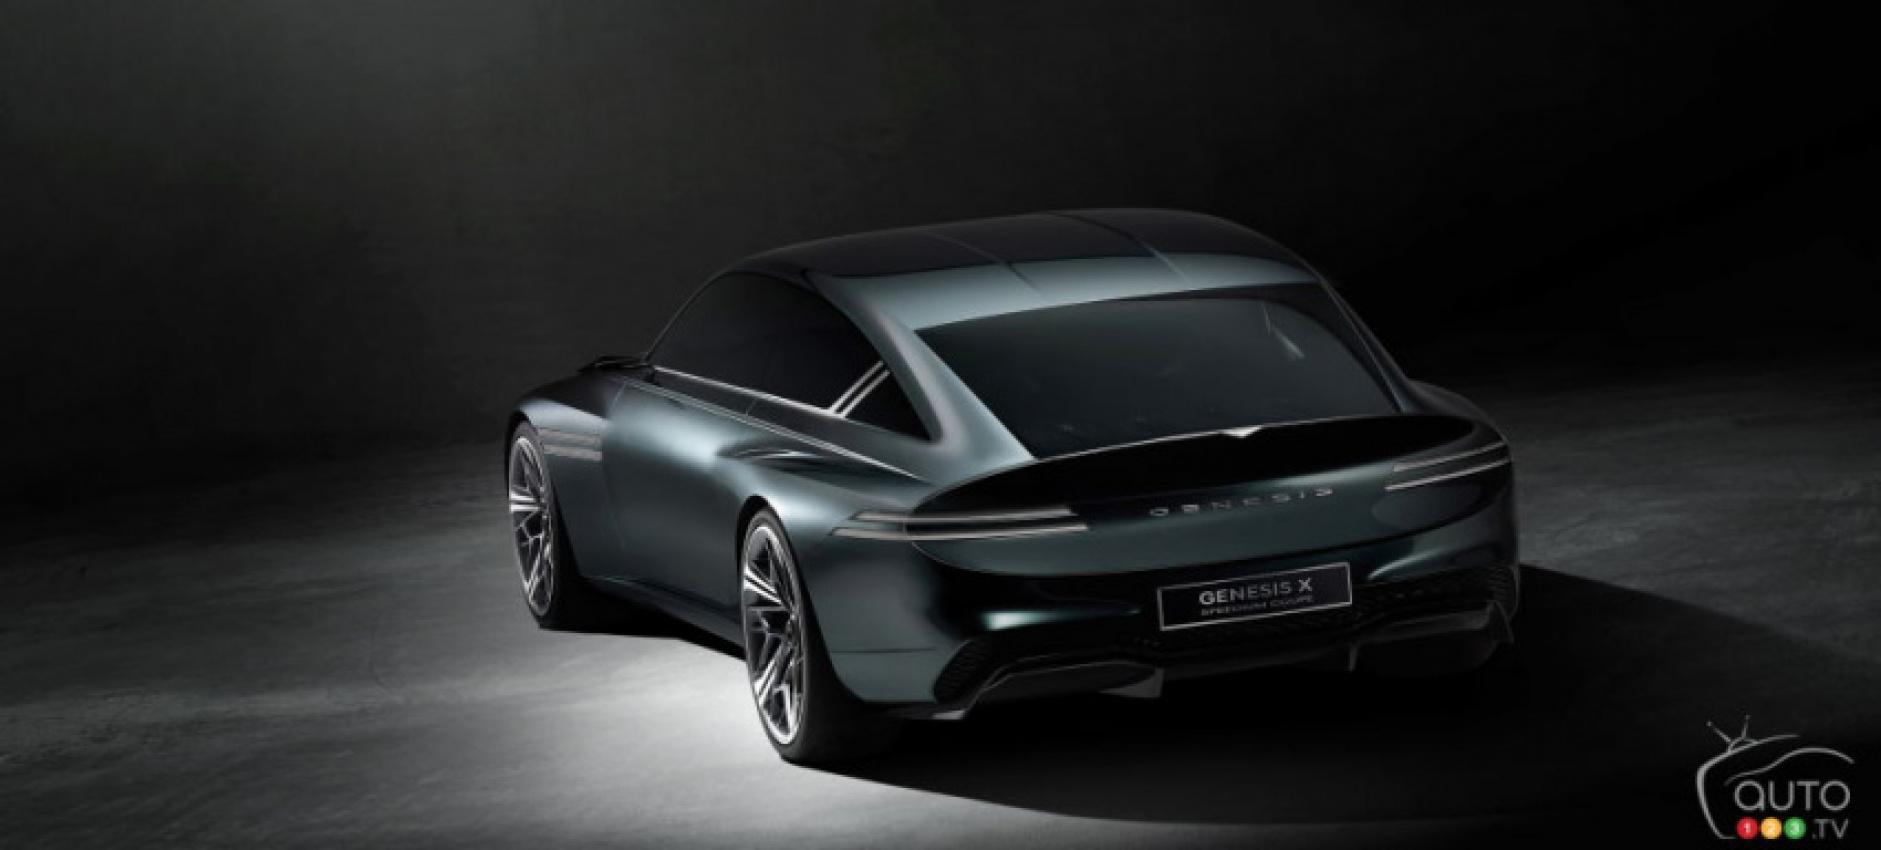 autos, cars, genesis, reviews, genesis’ new x speedium coupe concept, here to get folks dreaming